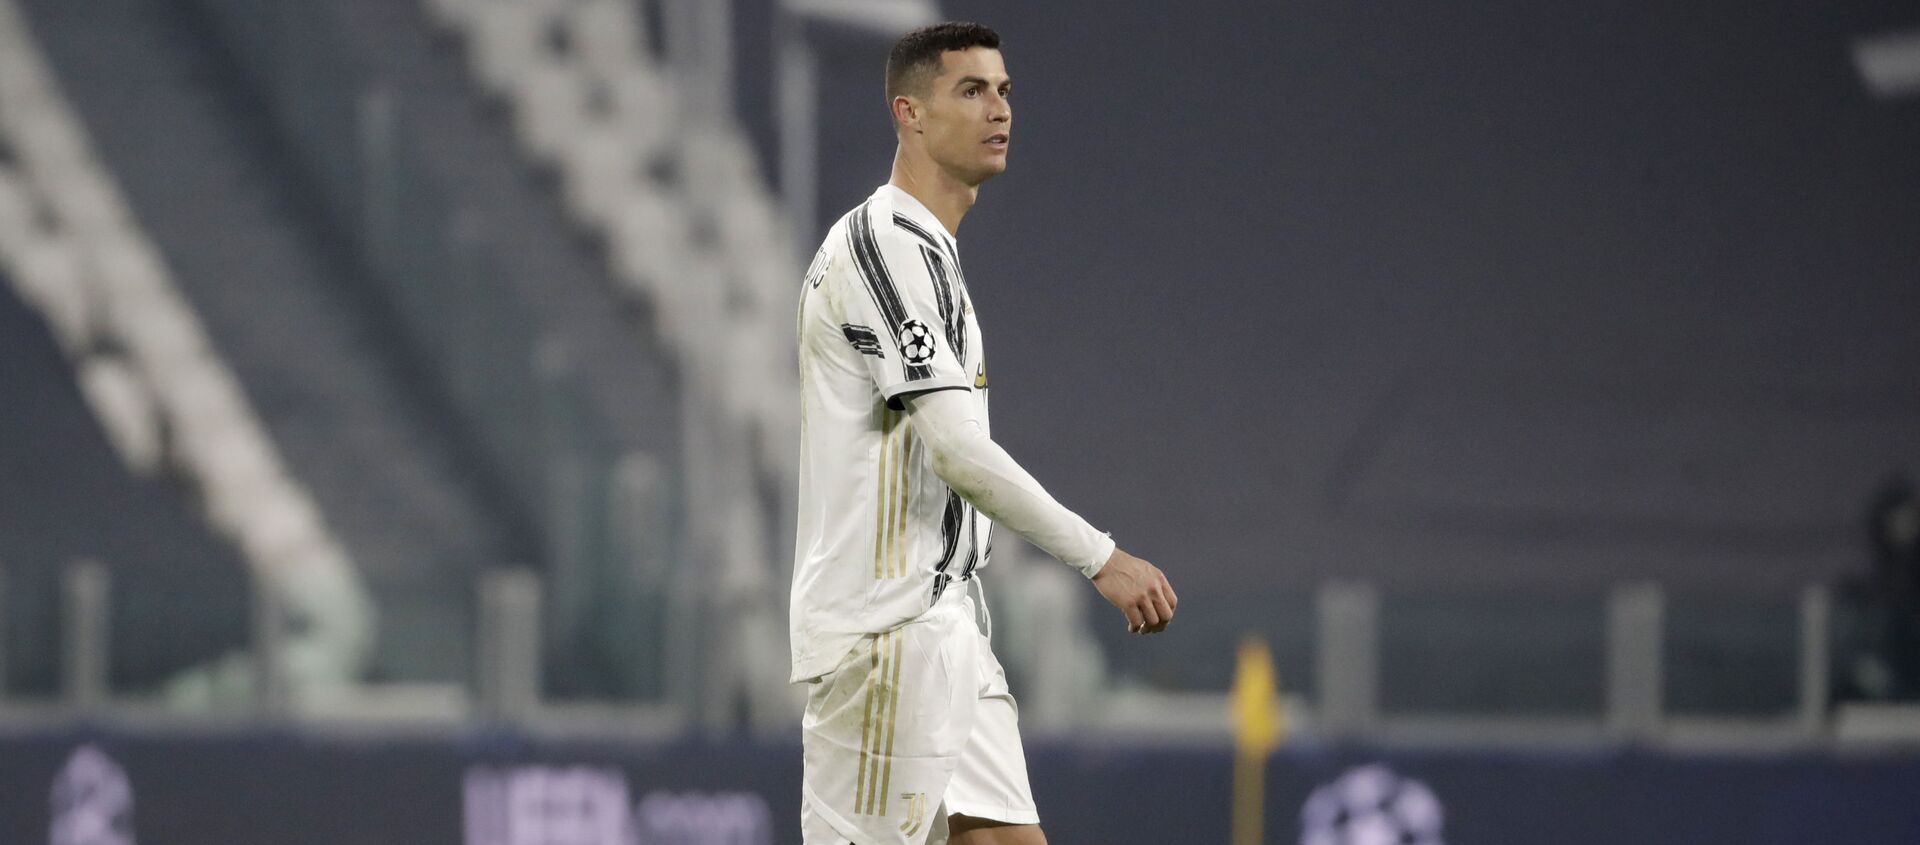 Juventus' Cristiano Ronaldo on the pitch at the end of the second leg of the 16th round of the Champions League match between Juventus and Porto in Turin, Italy, on Tuesday 9 March 2021. Juventus won 3-2 but Porto advances on a 4-4 aggregate result.  - Sputnik International, 1920, 15.06.2021